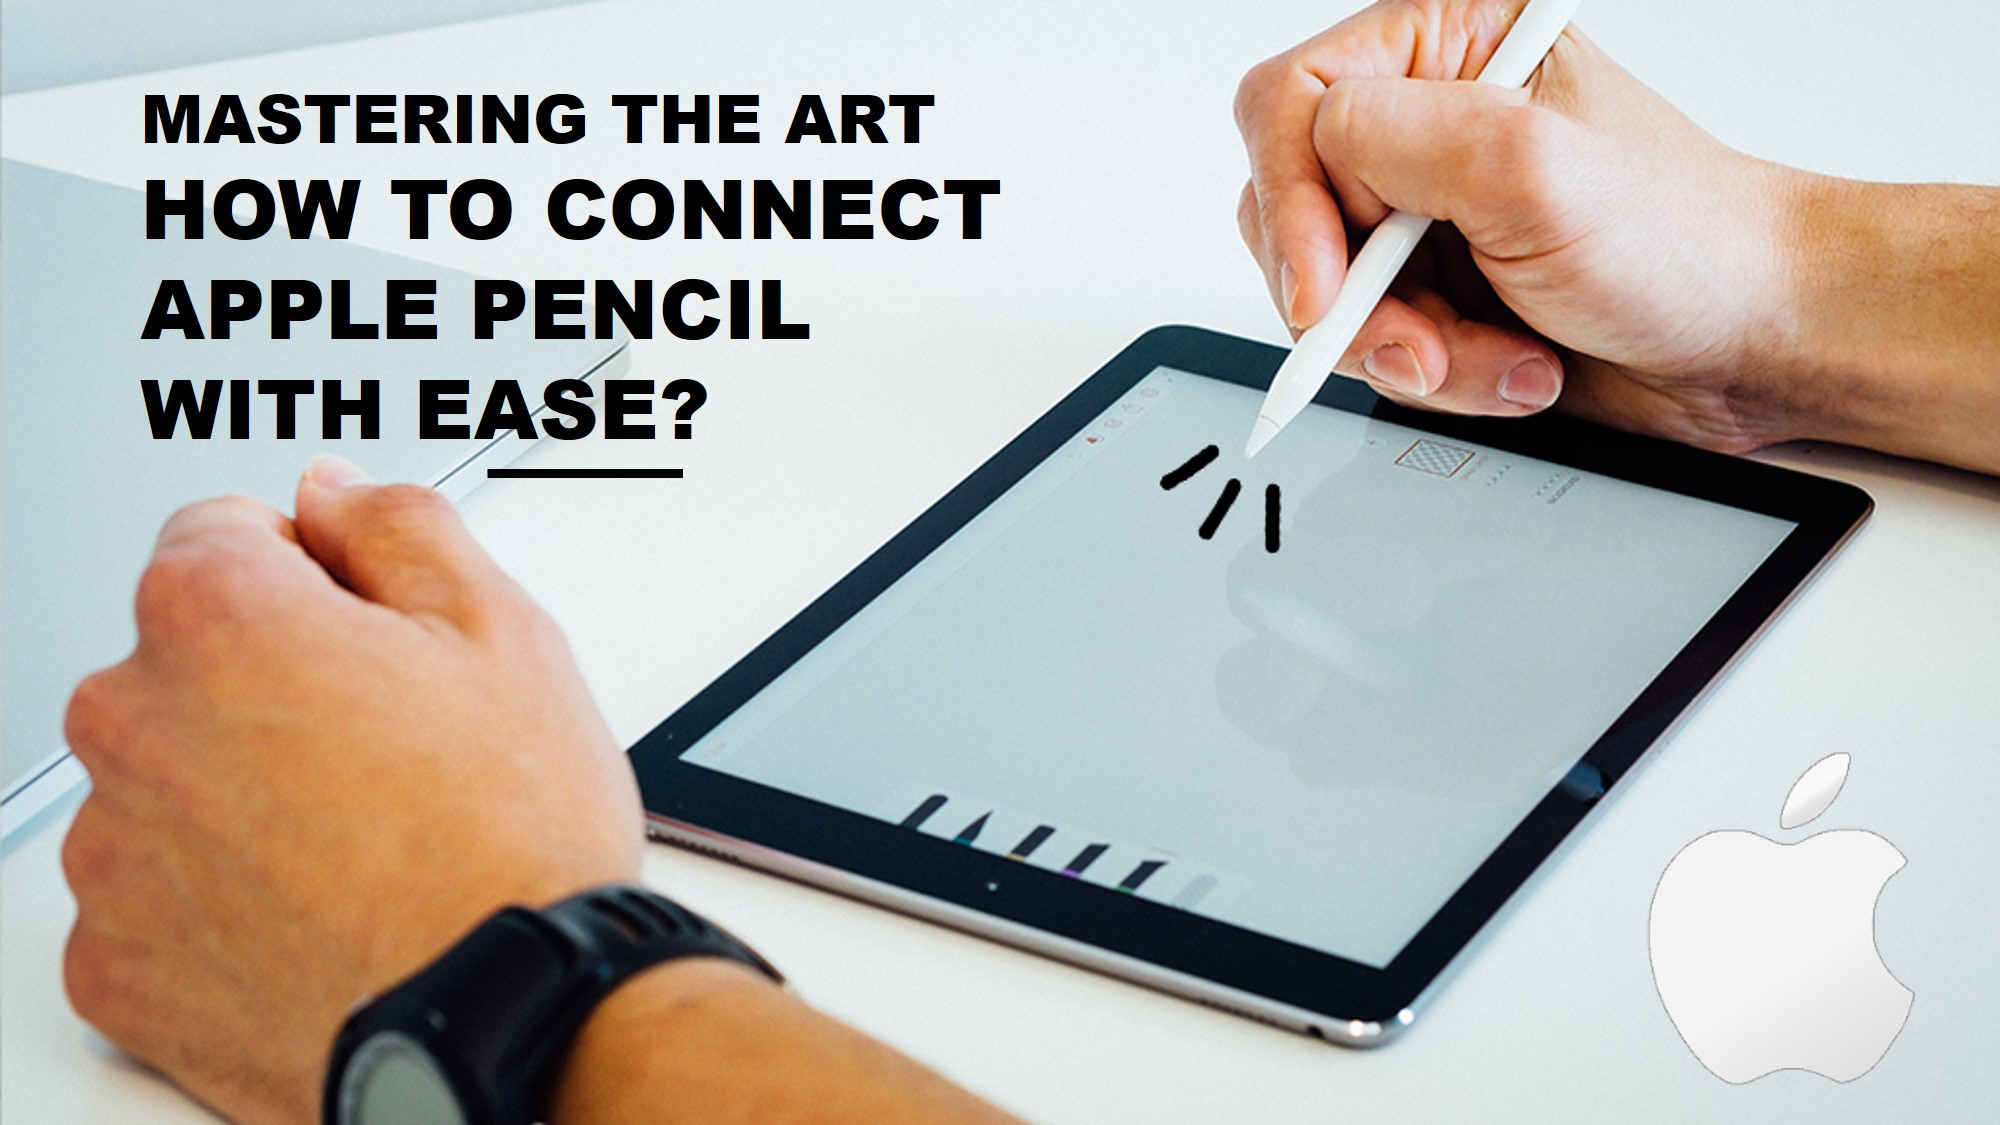 Mastering the Art: How to Connect Apple Pencil with Ease